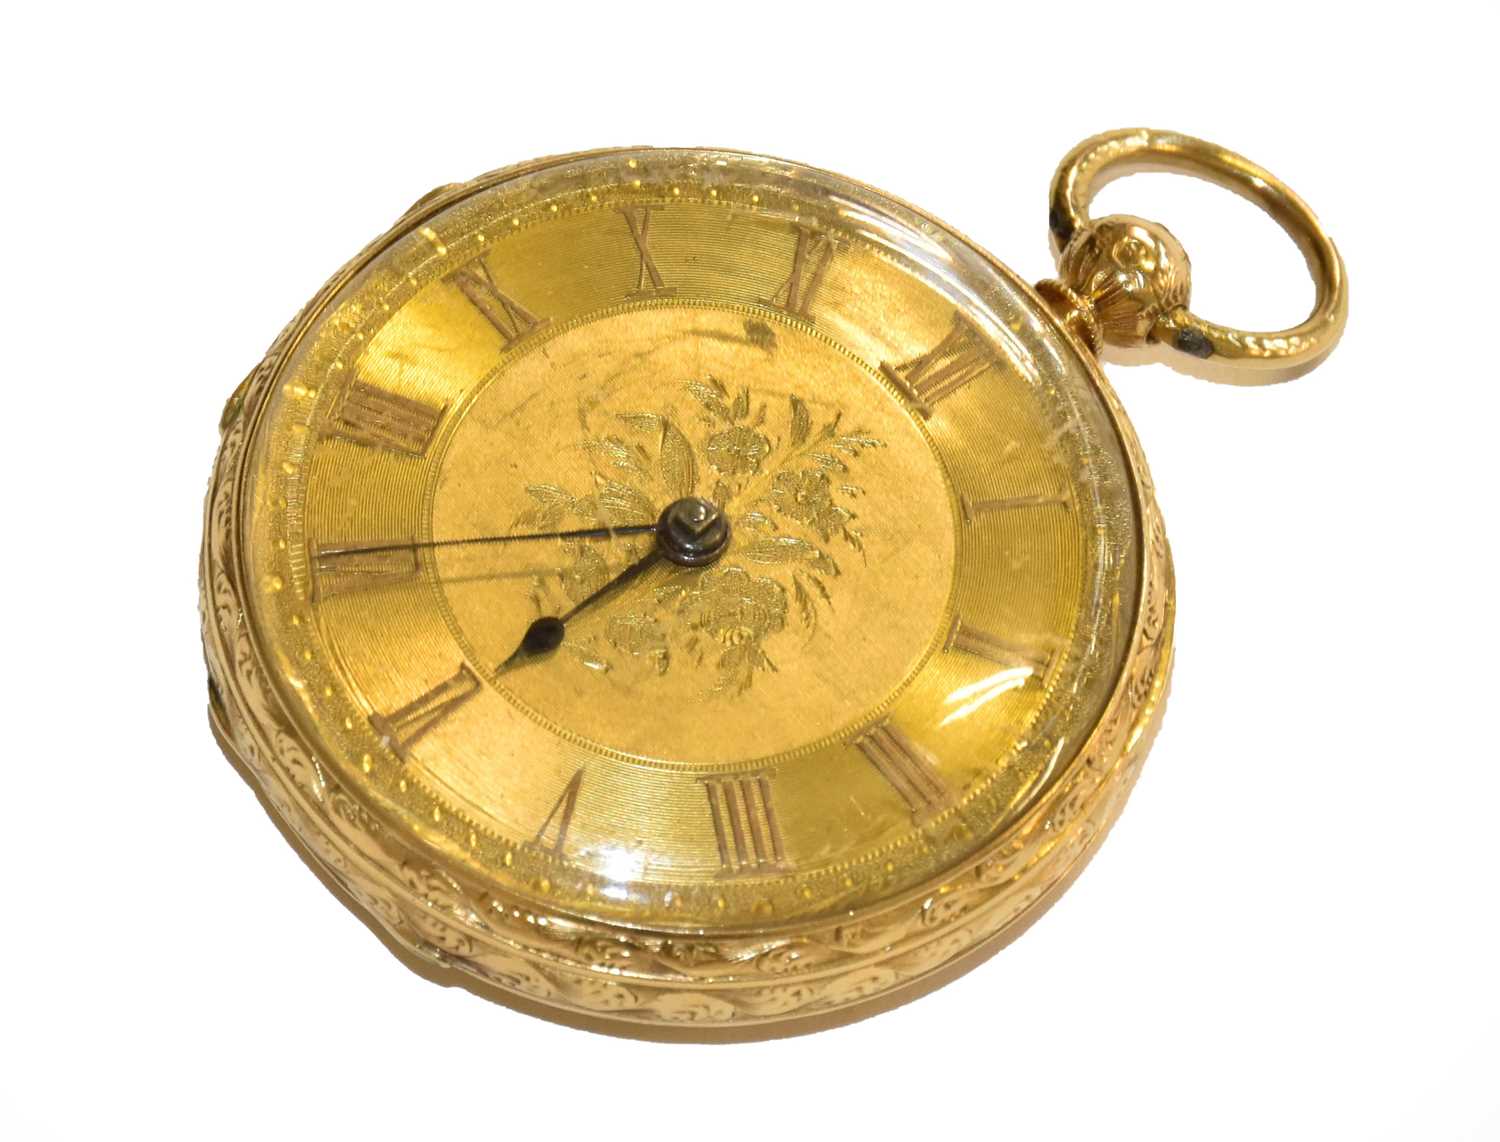 Lot 363 - An 18 carat gold pocket watch, case with